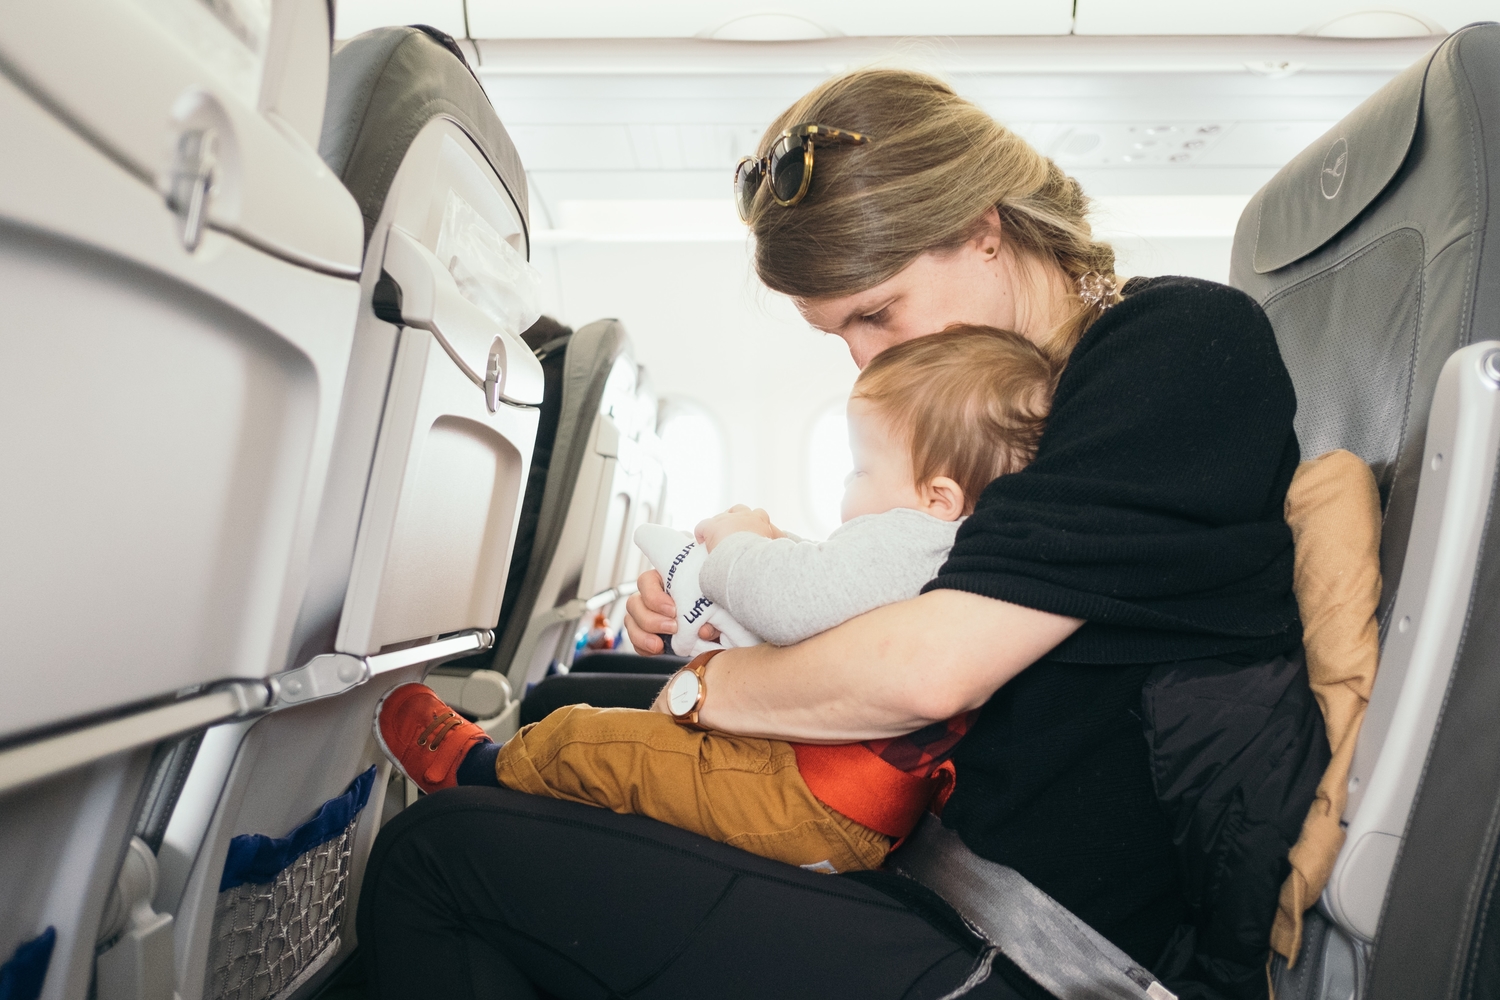 Mom with baby on a plane